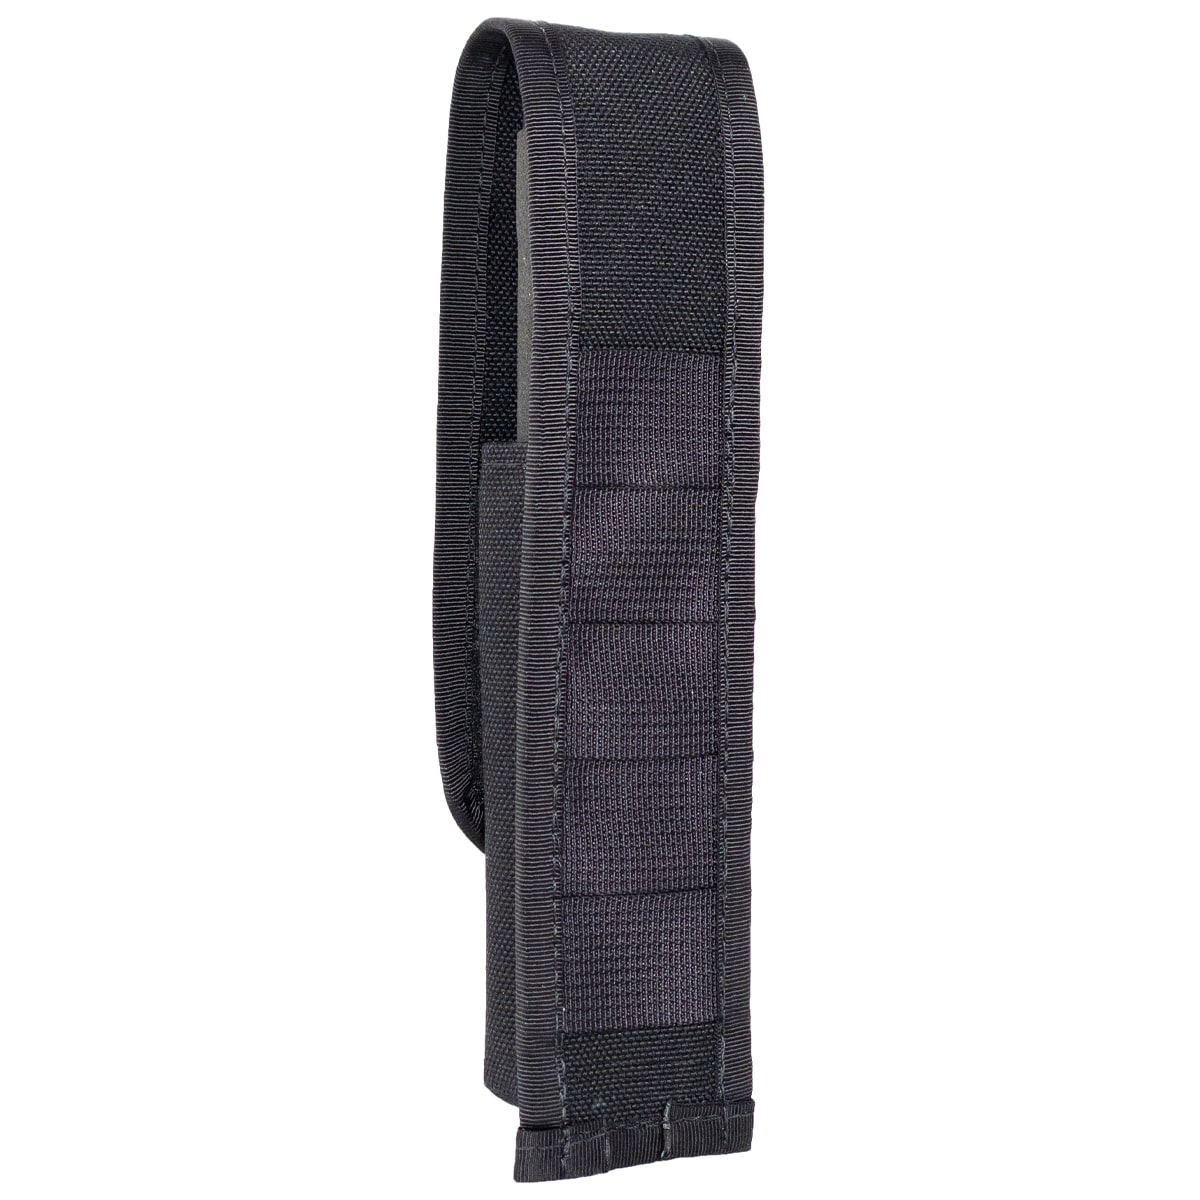 Baton Pocket Molle/PALS for Cowell Tactical Vests